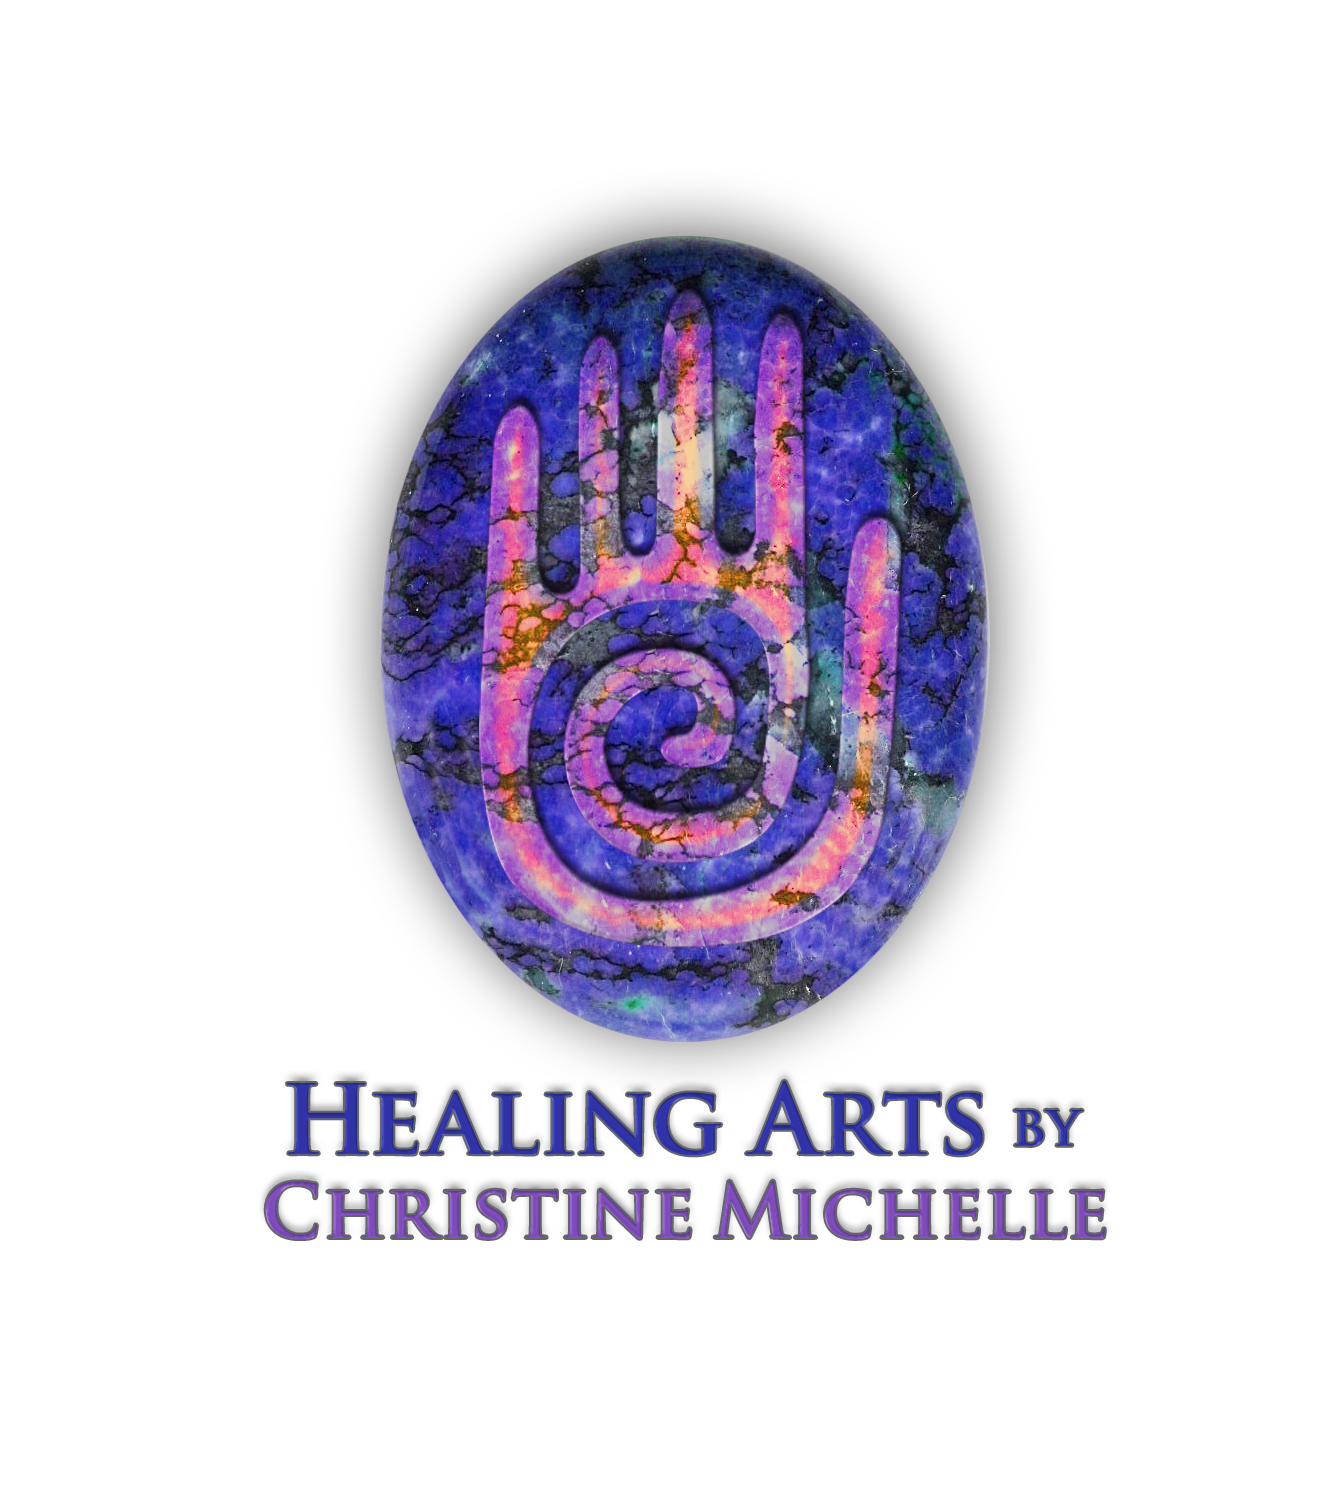 HEALING ARTS by Christine Michelle